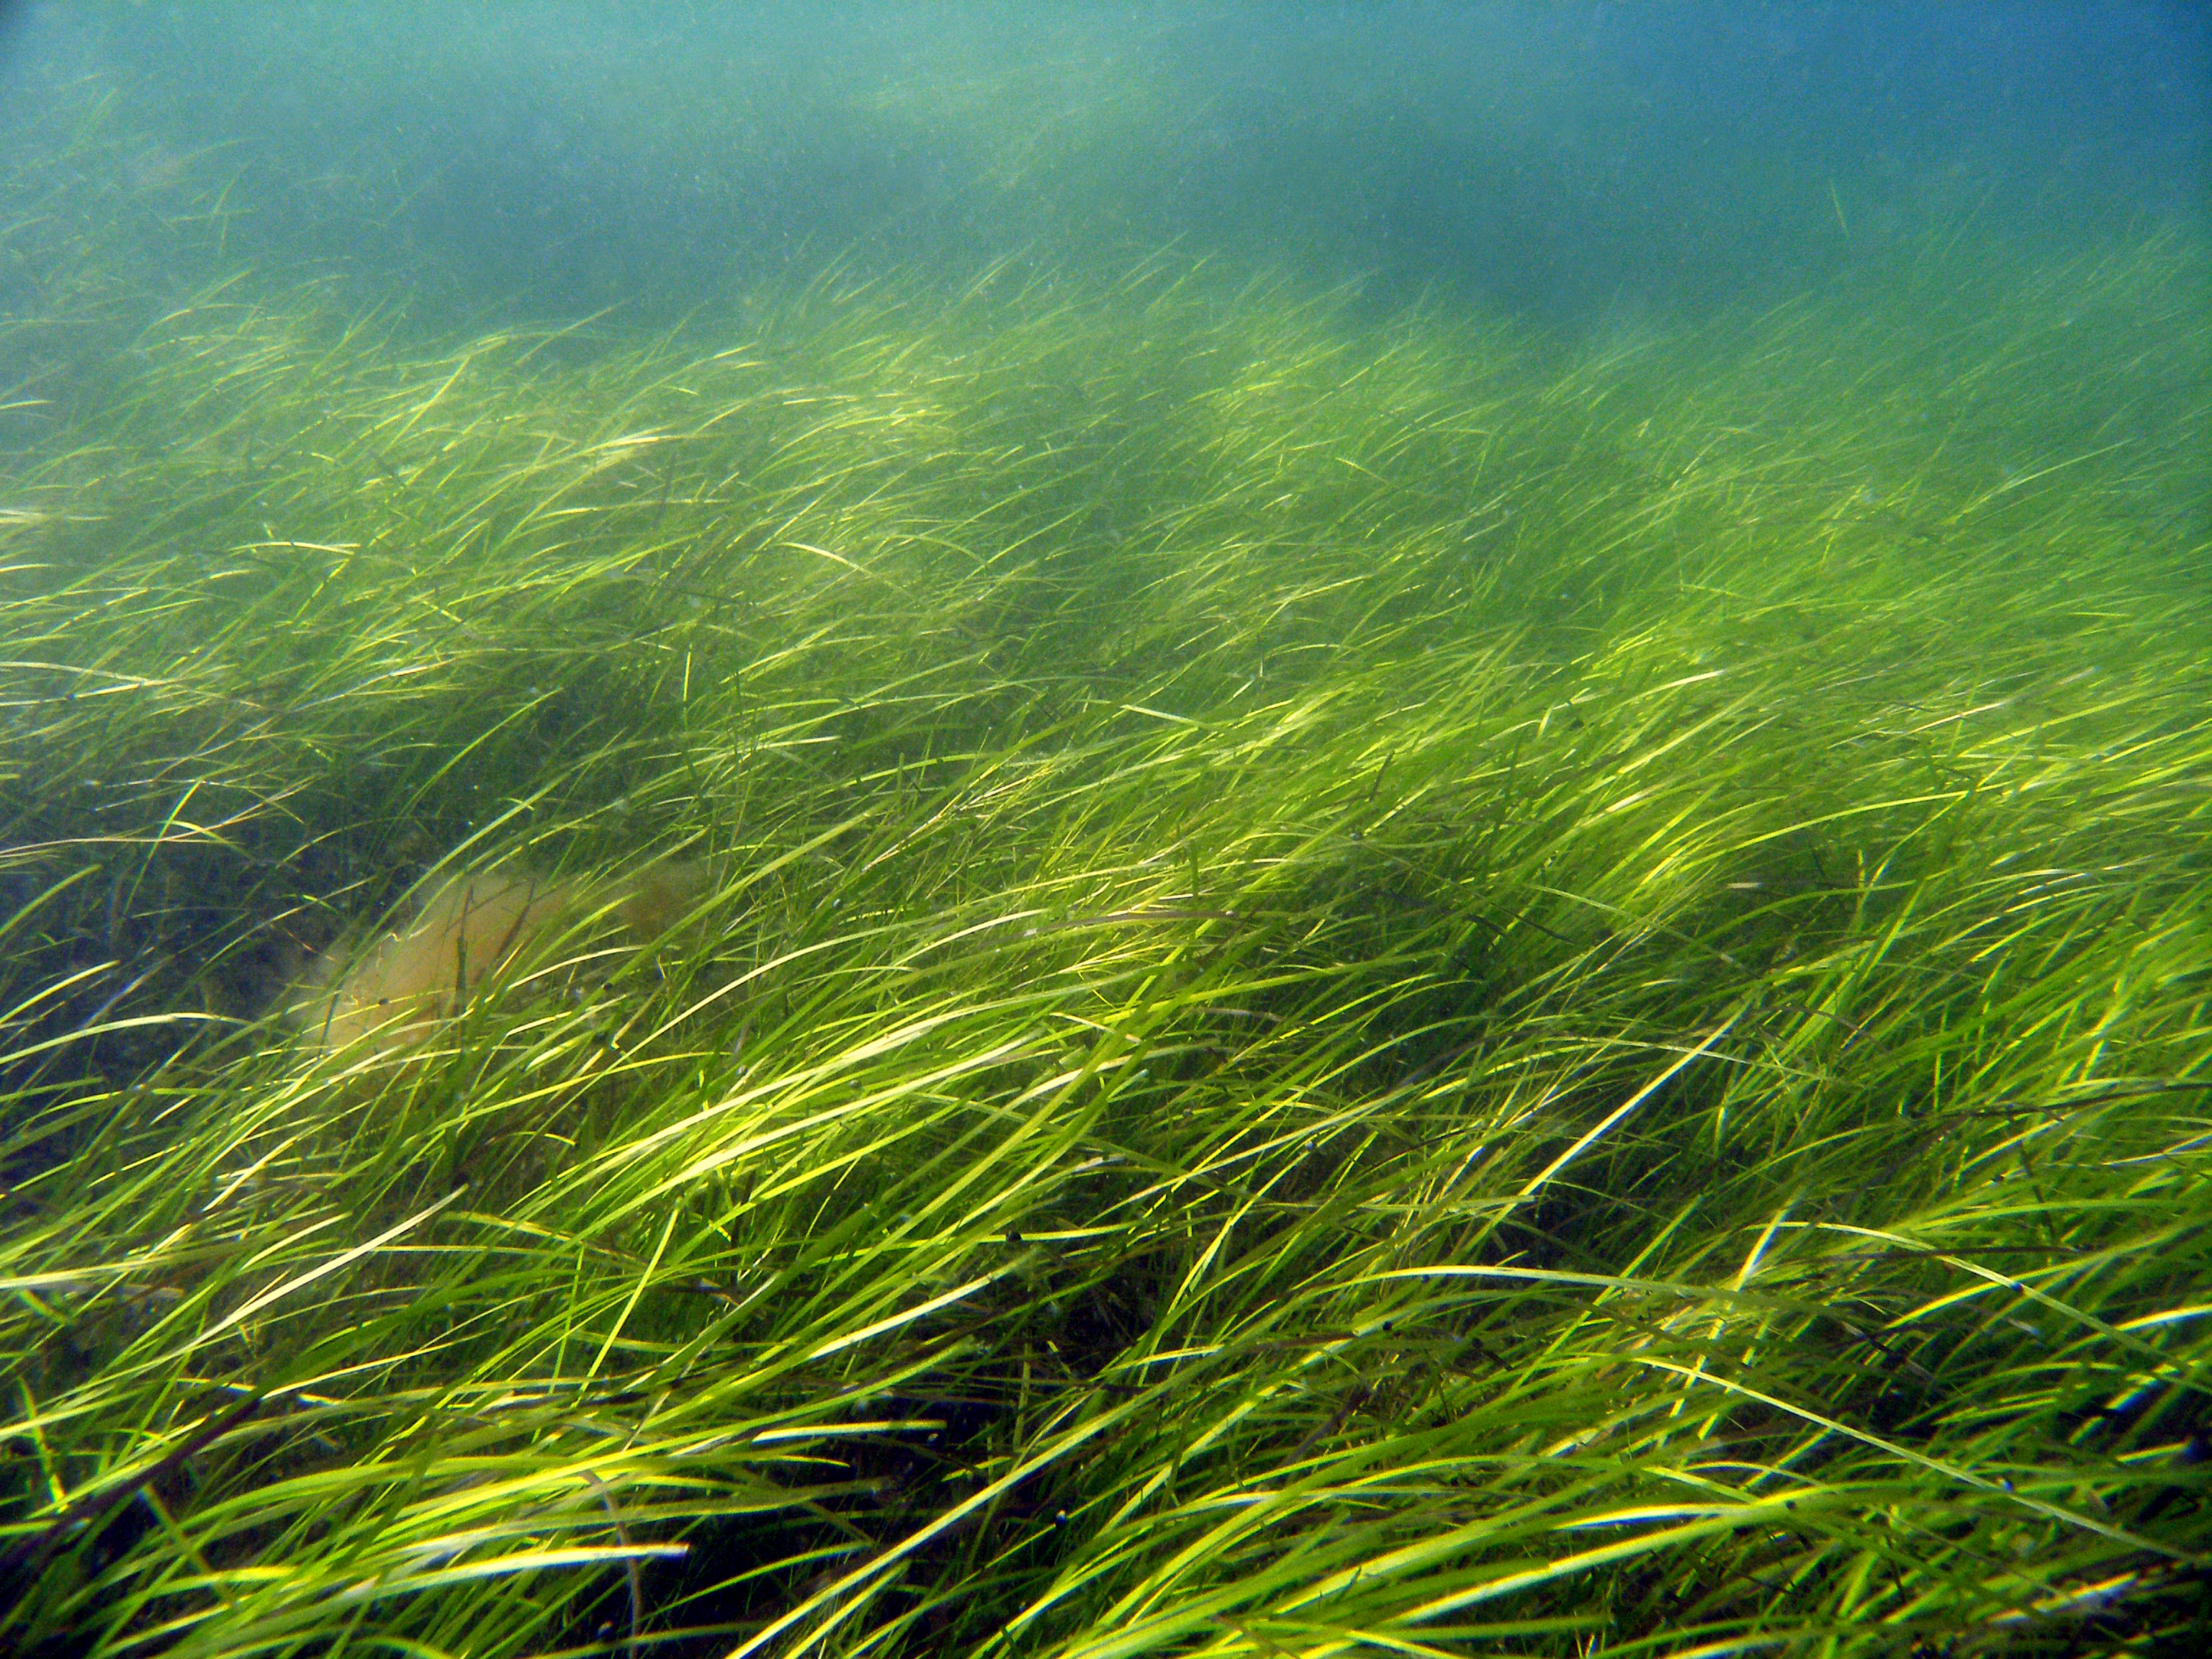 Underwater photo of lush green eelgrass being moved in a current